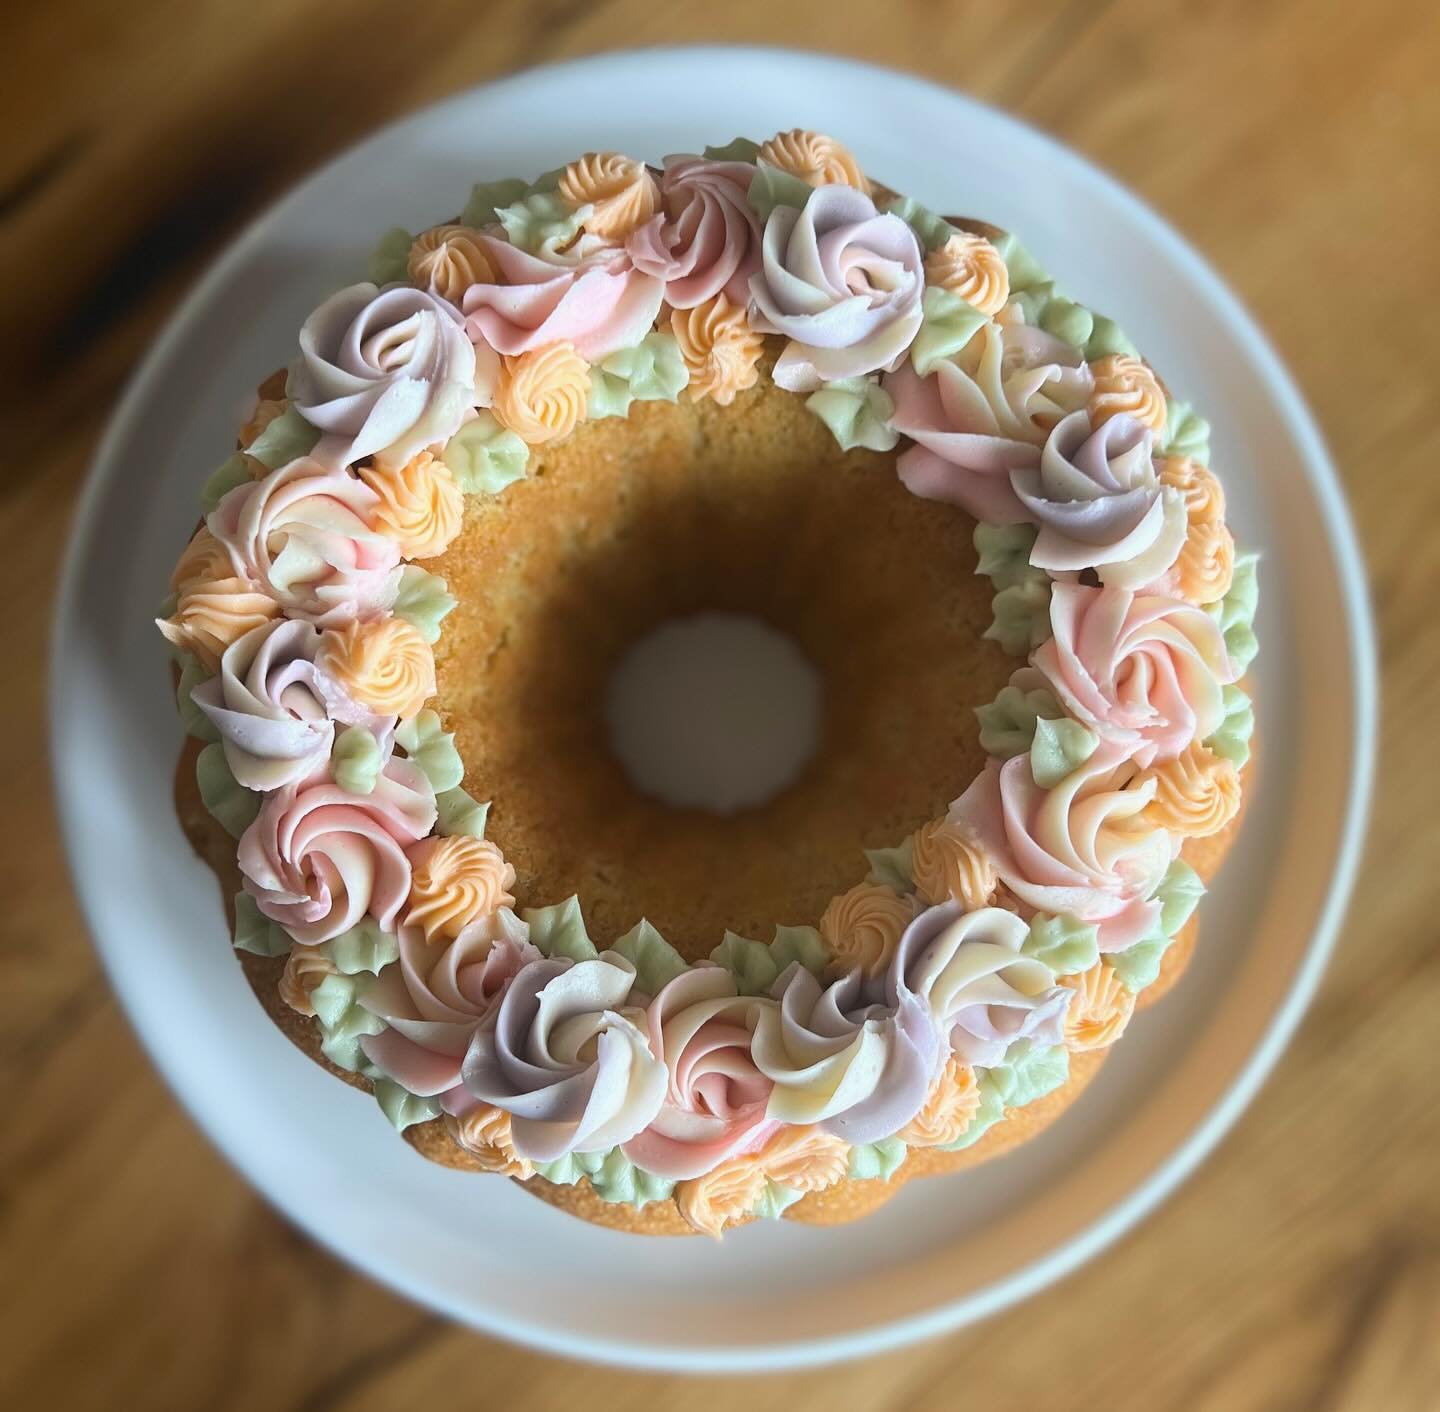 ✨Circle of Life Bundt Cake✨
.
.
Another item available for Mother&rsquo;s Day preorder! Rich traditional pound cake crowned with pastel buttercream roses. 🌹
.
.
#cakedecorating #buttercream #frosting #poundcake #bakery #yum #treatyourself